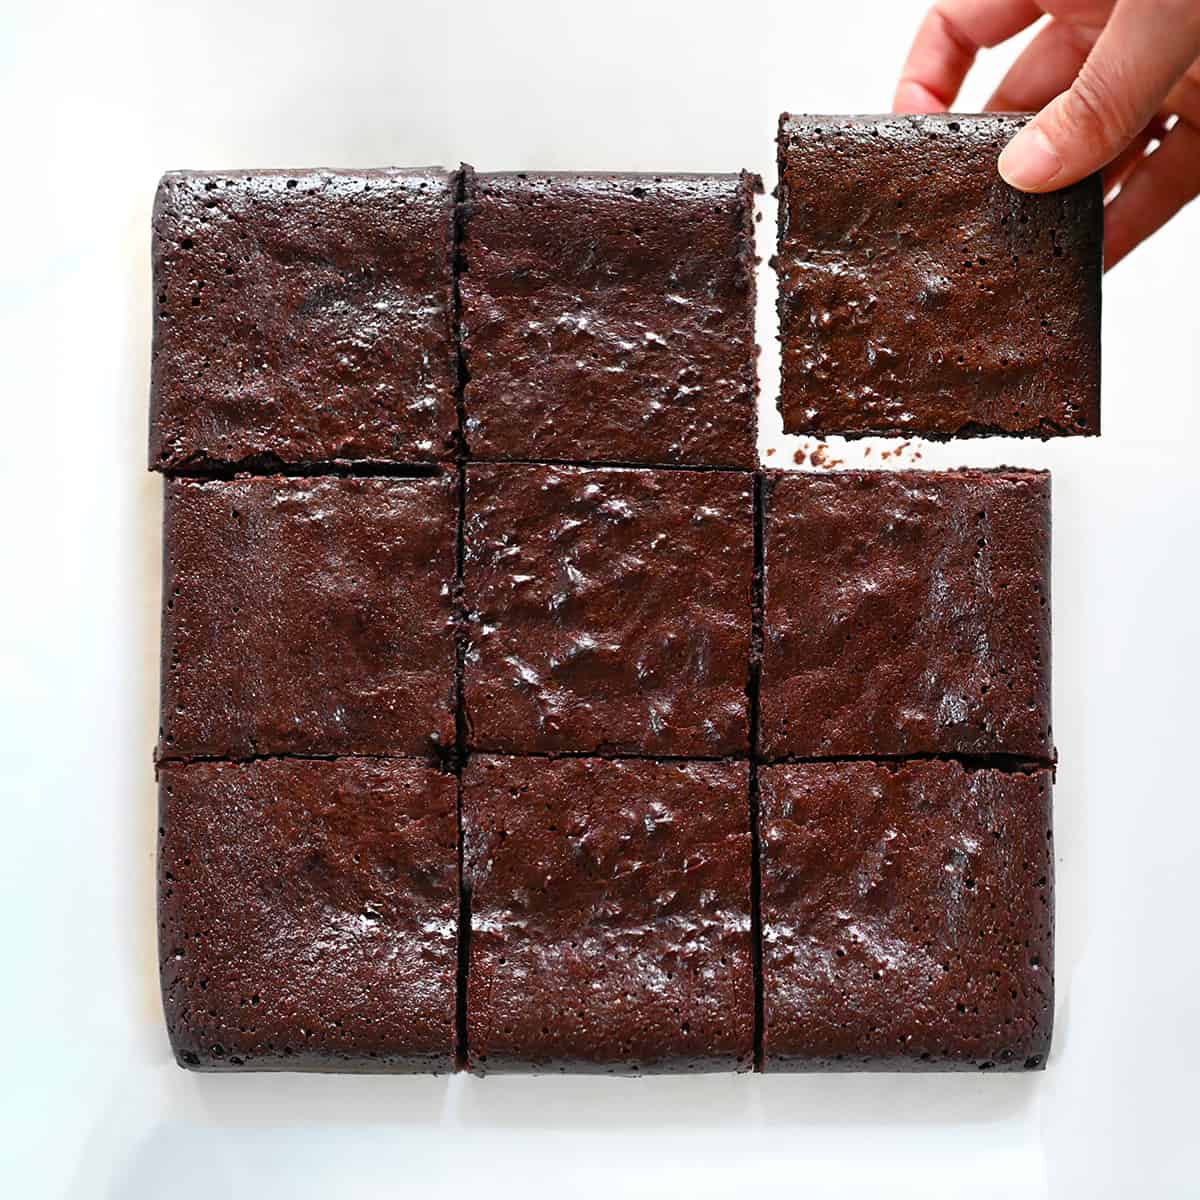 A hand is removing the corner square of a paleo brownie from a group of nine brownies.